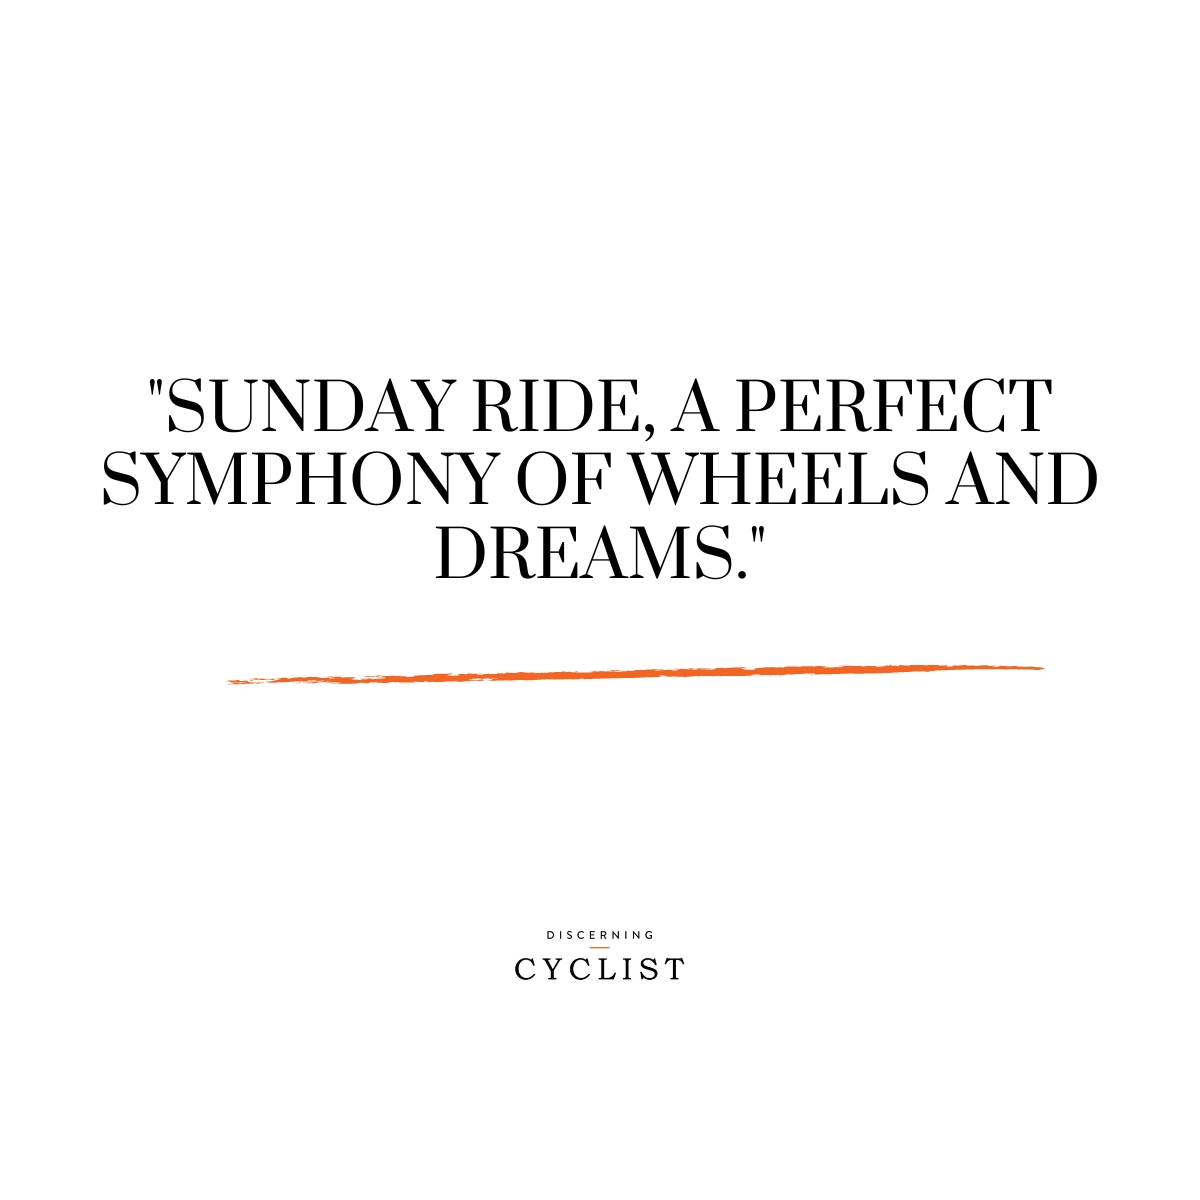 "Sunday ride, a perfect symphony of wheels and dreams."